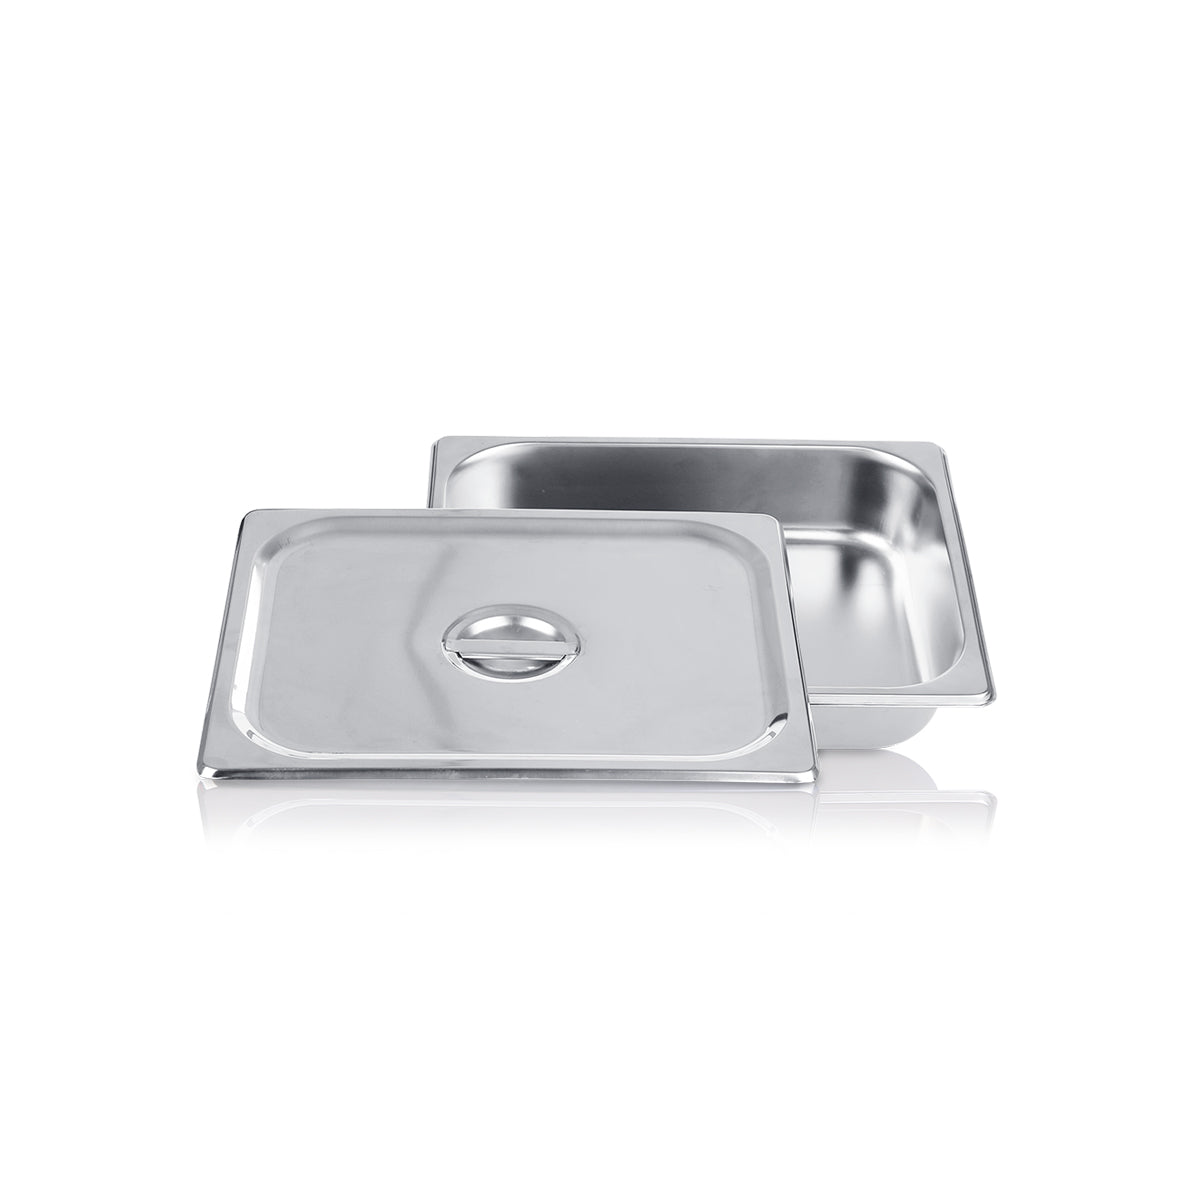 Standard GN gastronorm sizing food pan specifically for Vidacasa® Universal buffetware equipment.